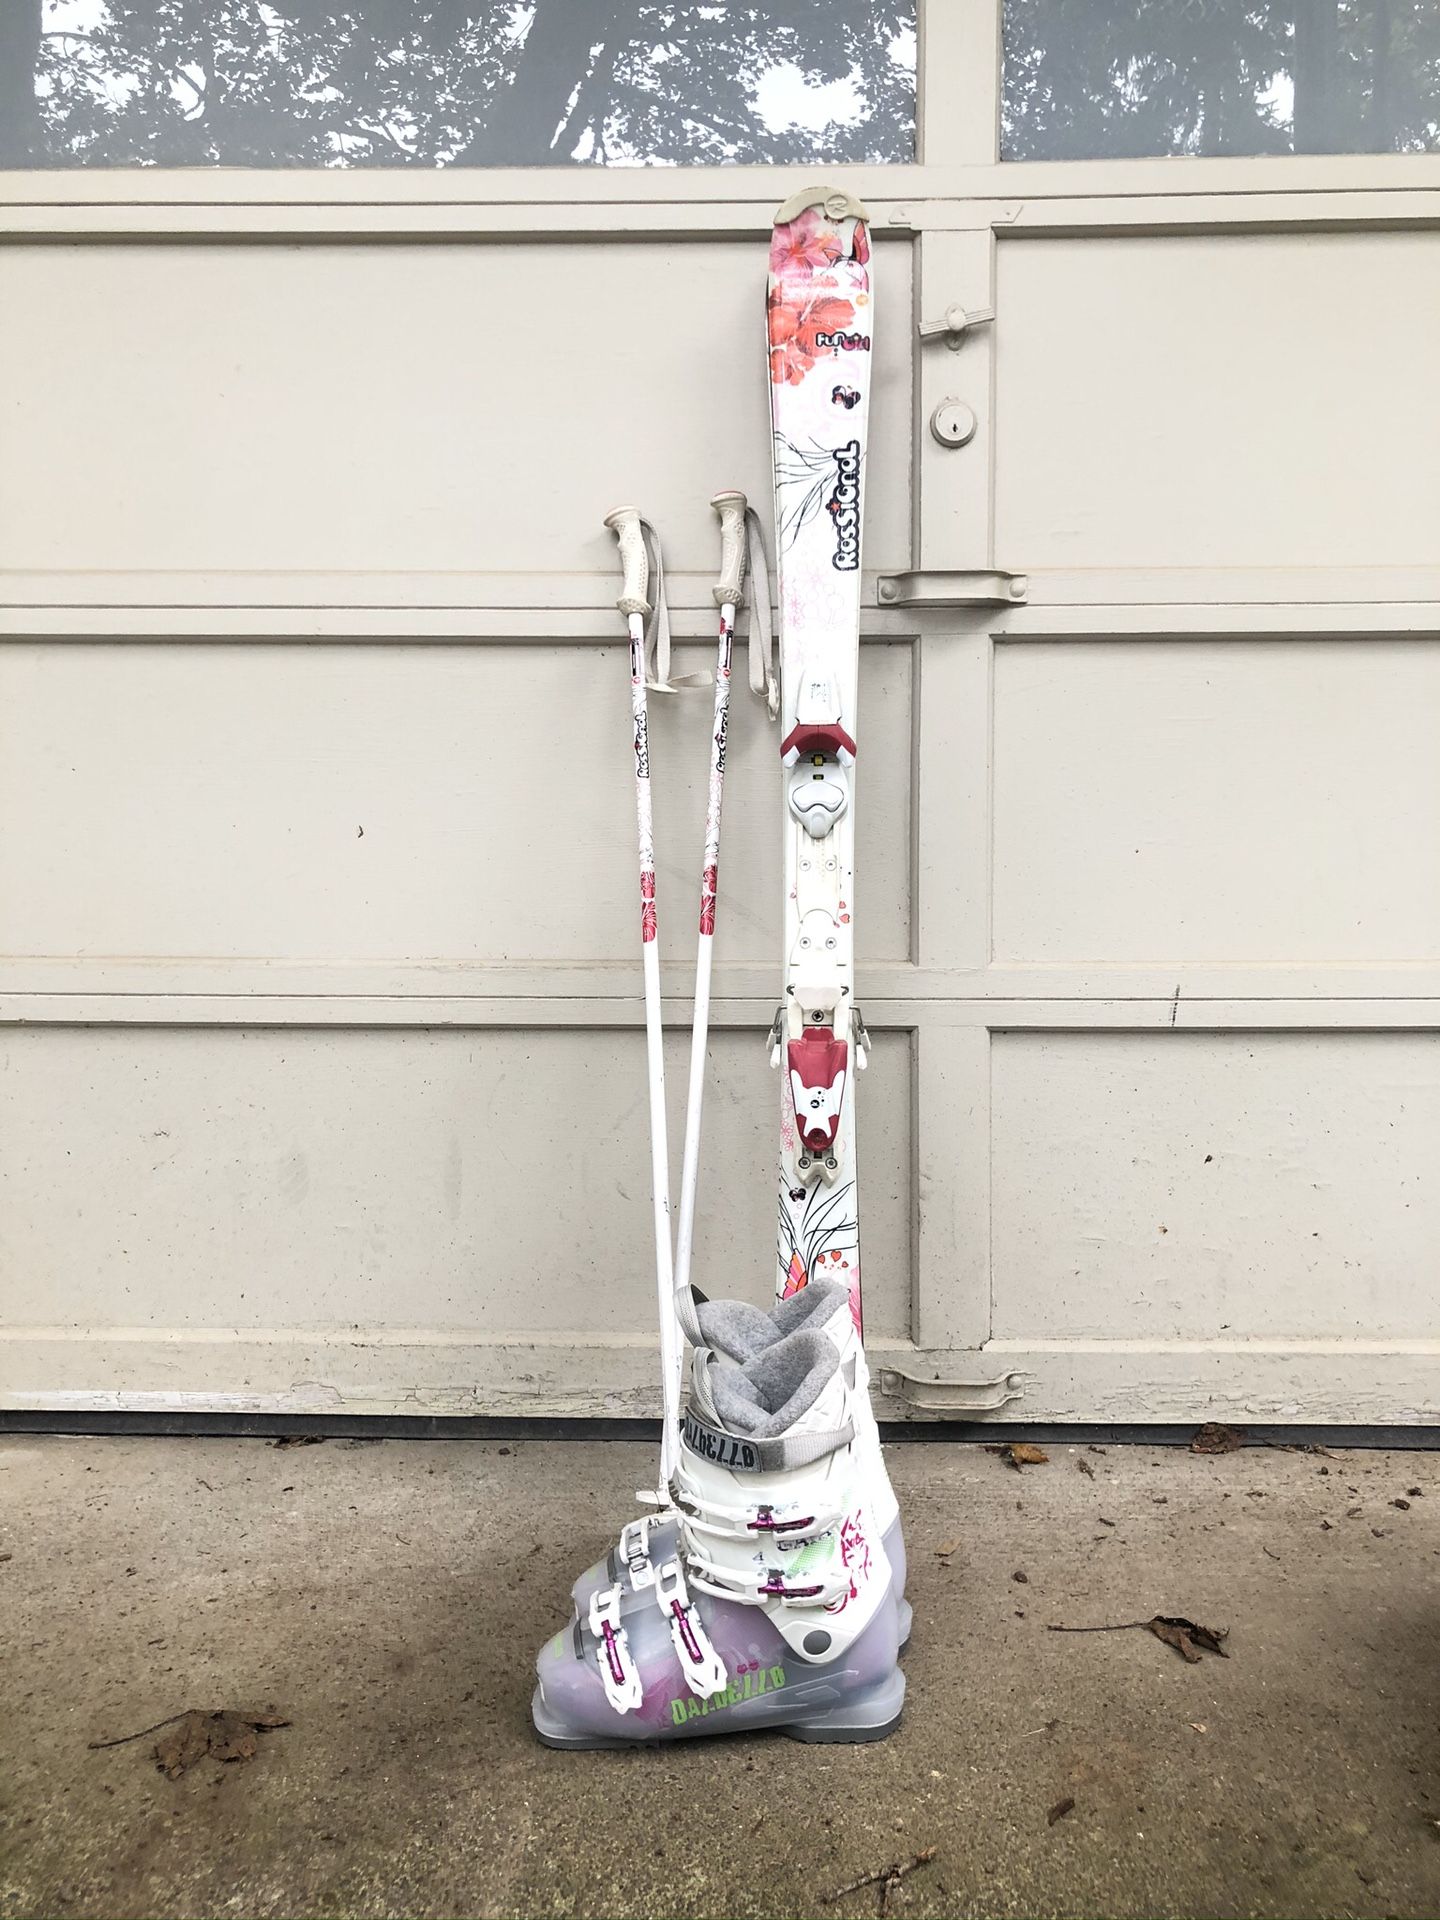 Rossignol “Fun Girl” Skis - 130cm and Size 5.5 boots